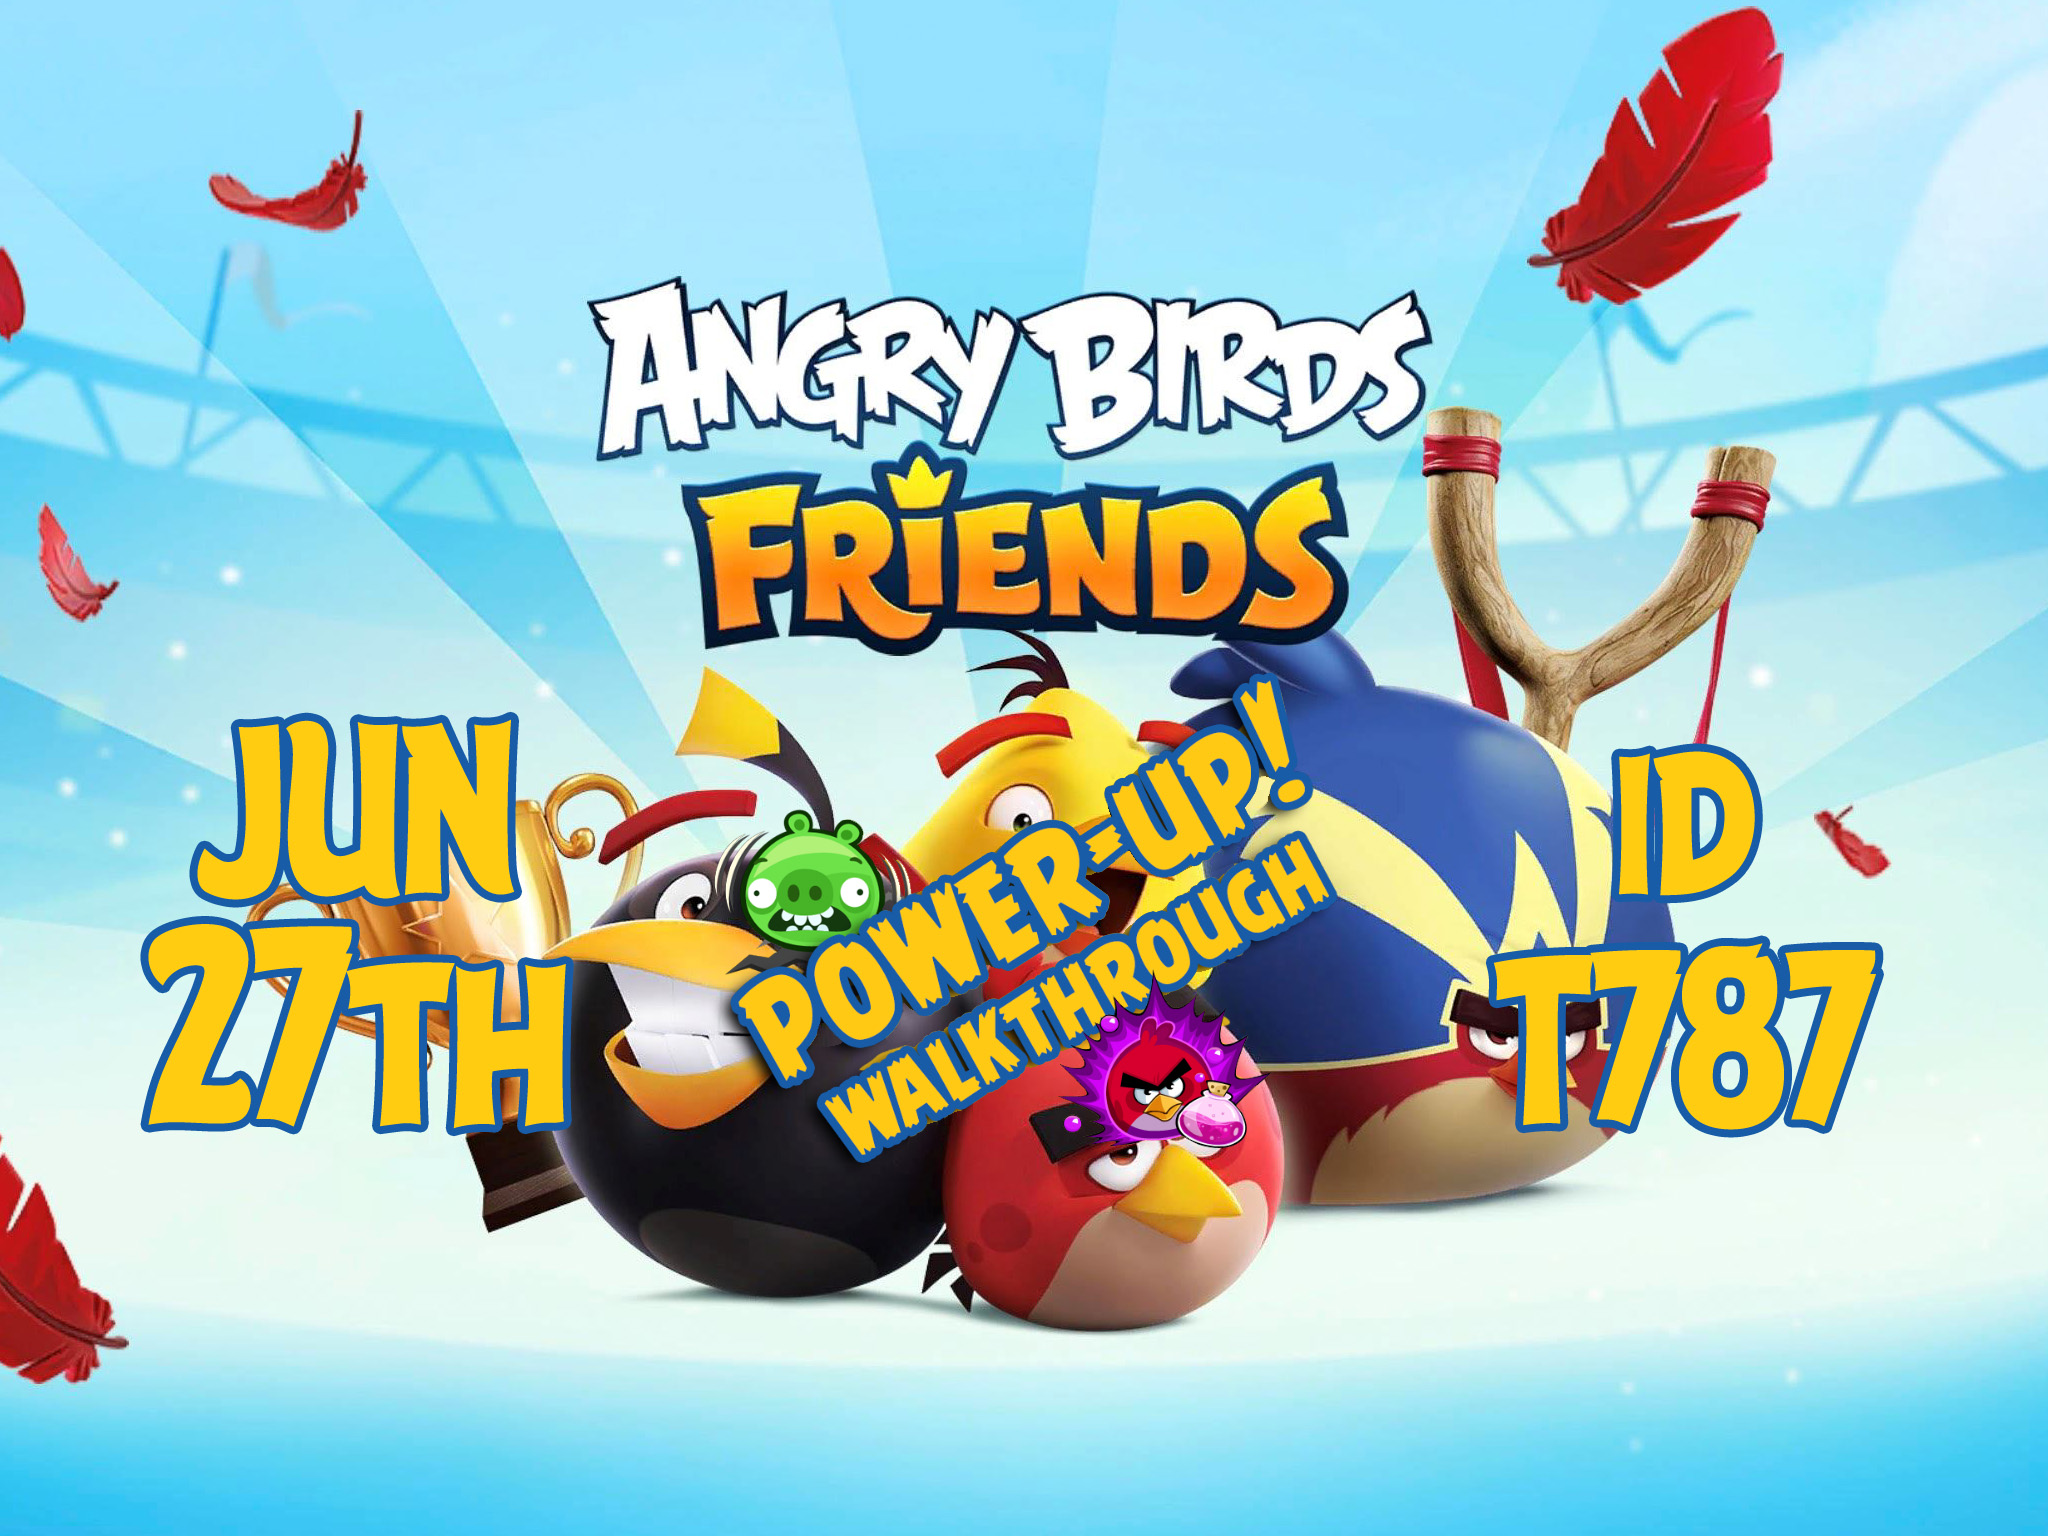 Angry-Birds-Friends-Tournament-T787-Feature-Image-PU